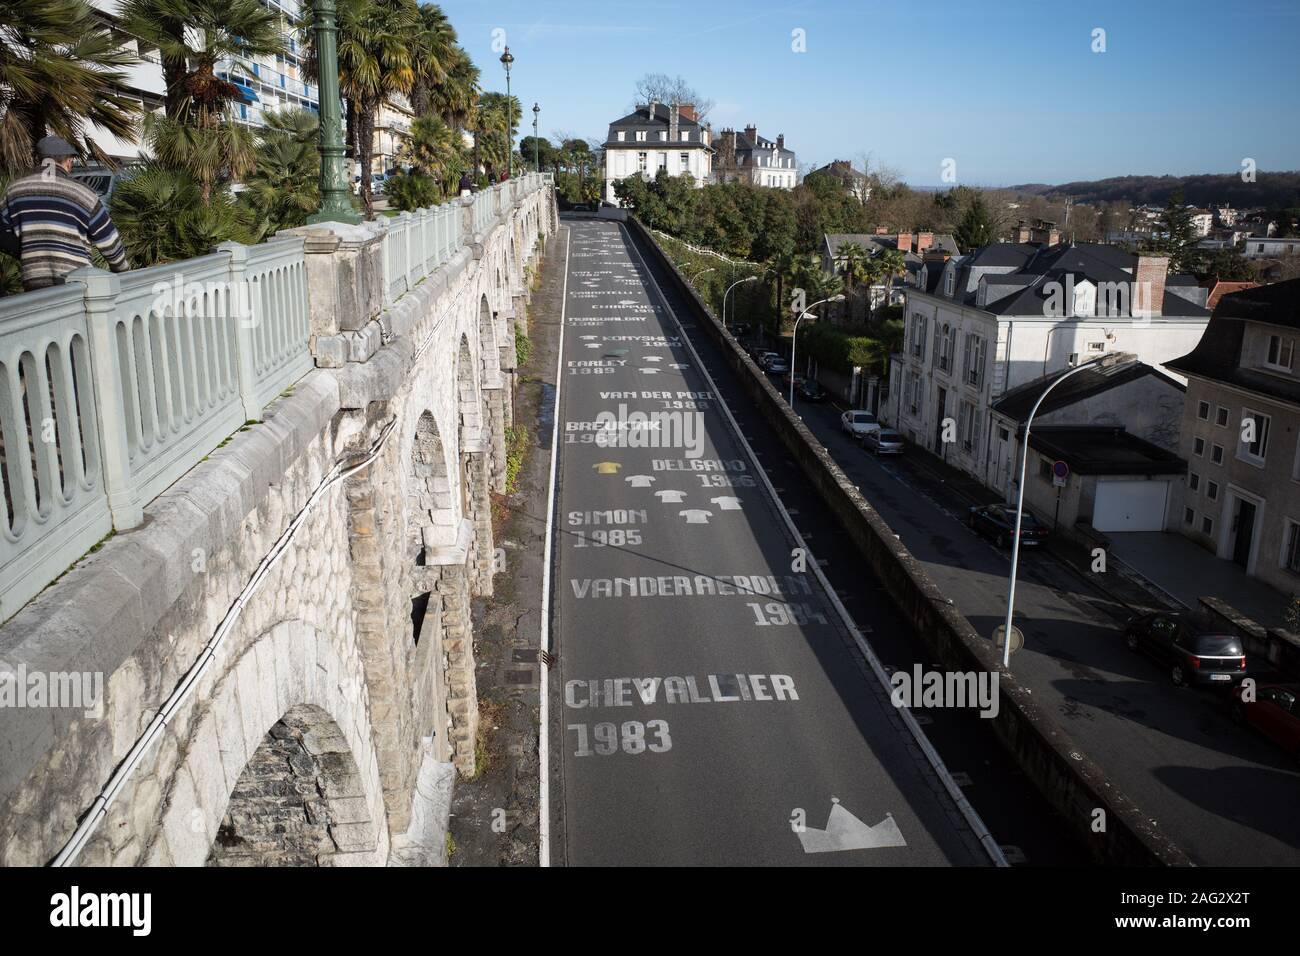 PAU FRANCE - ON AVENUE NAPOLEON BONAPARTE 'LA PENTE EST PEINTE' ( THE SLOPE IS PAINTED ) ABOUT SIXTY NAMES OF CYCLIST WHO HAVE WON A STAGE OF THE TOUR DE FRANCE SINCE 1930 - EACH YEARS PAU IS A STAGE IN THE TOUR DE FRANCE - CYCLING SPORT - INTERNATIONAL CYCLING - SPORT HISTORY © Frédéric BEAUMONT Stock Photo